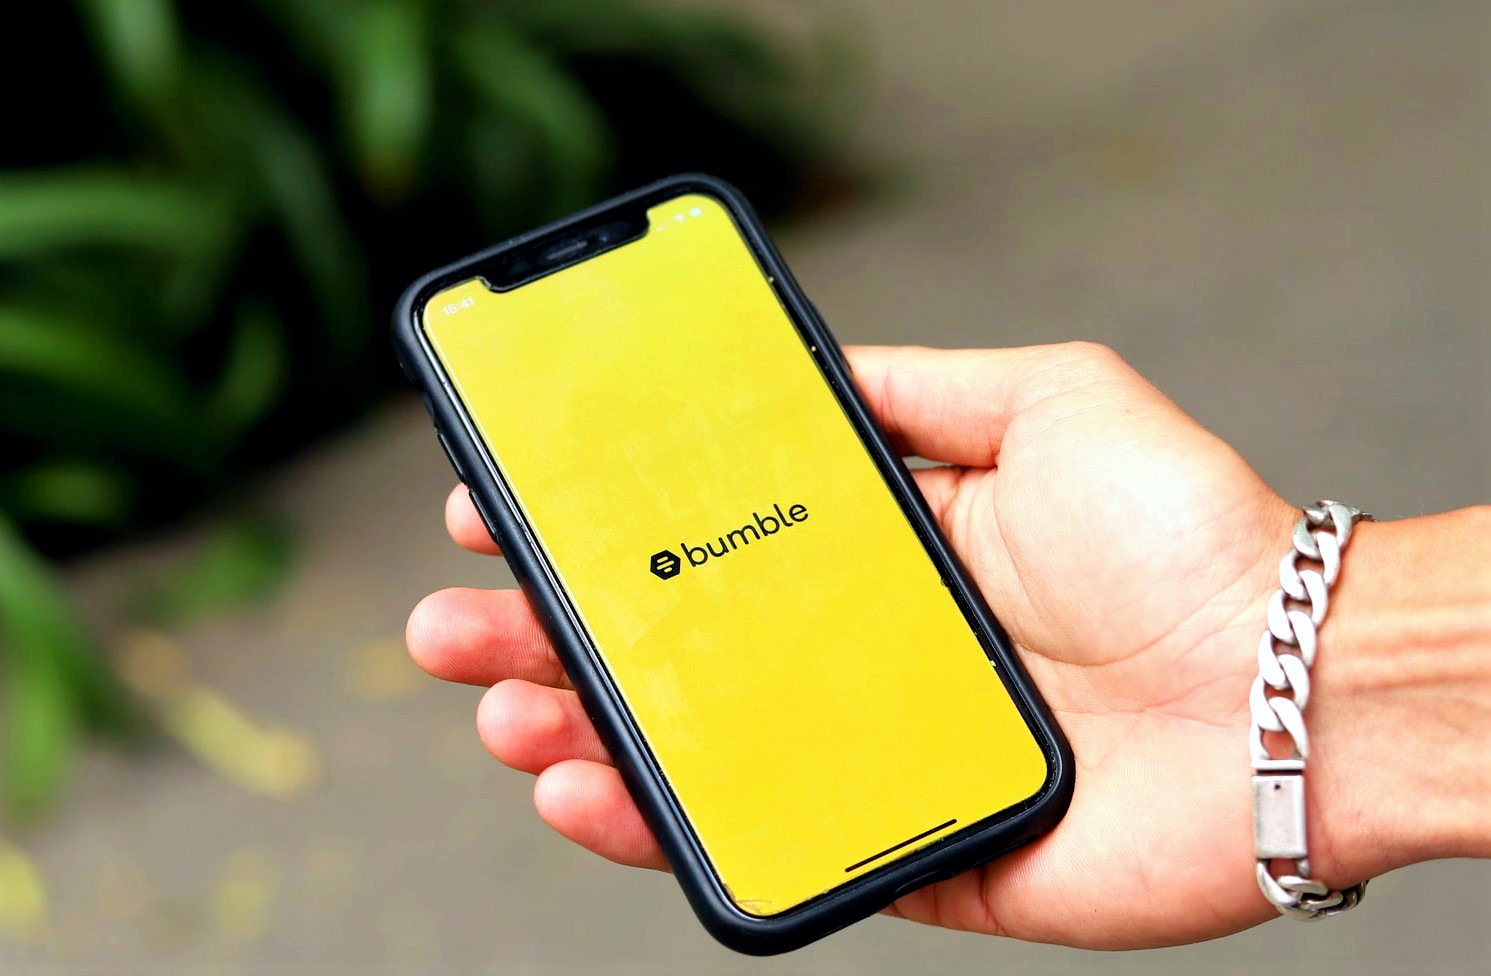 Dating app Bumble stock spikes after Q4 earnings